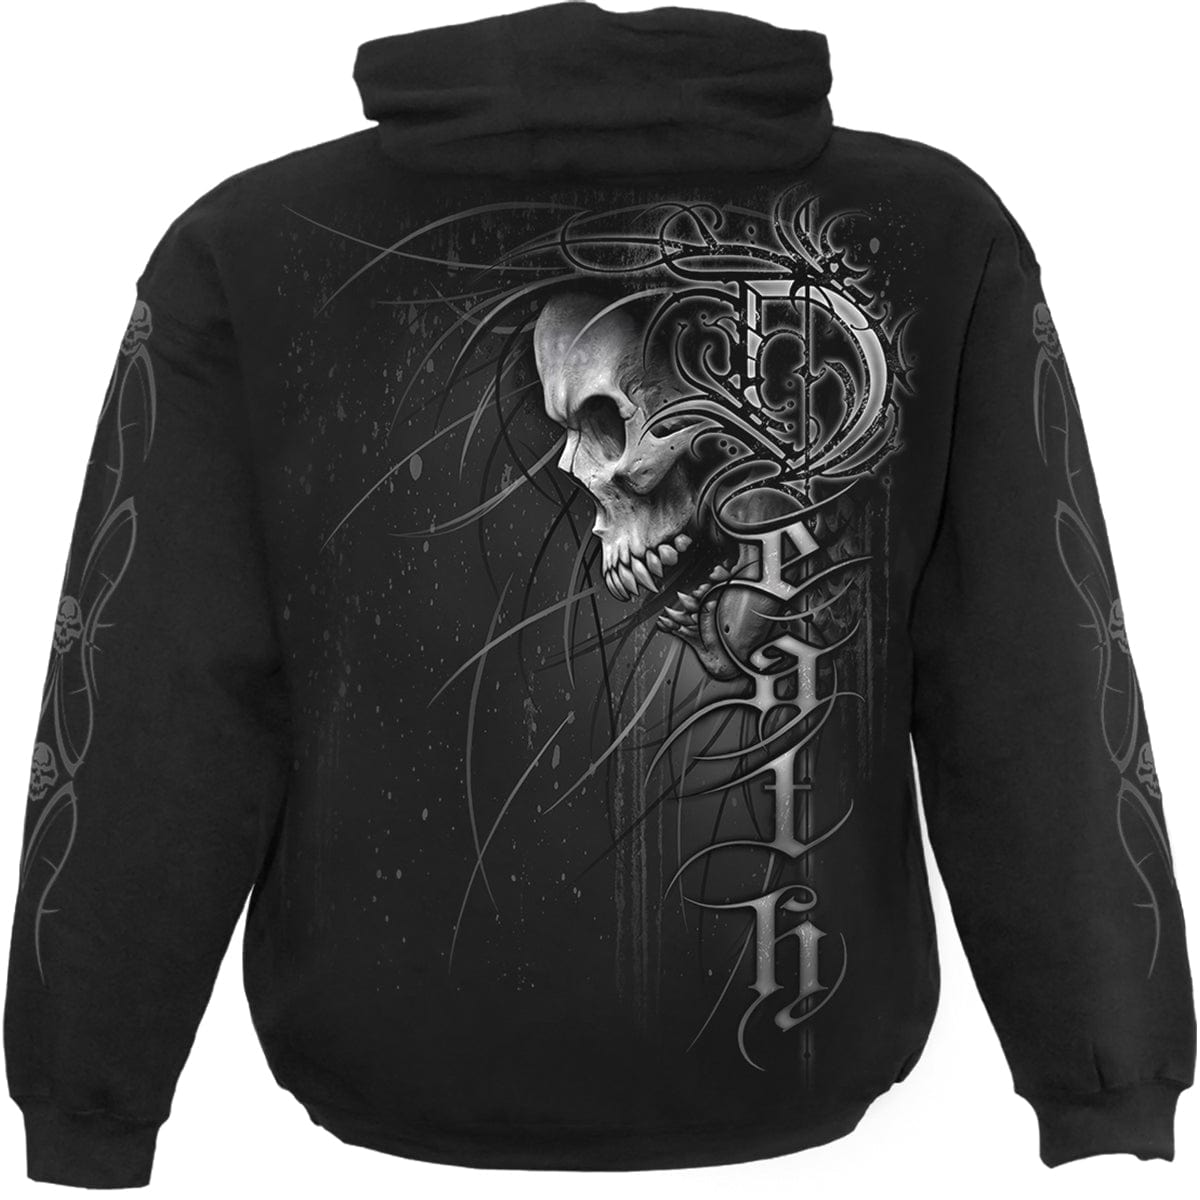 DEATH FOREVER - Hoody Black - Spiral USA